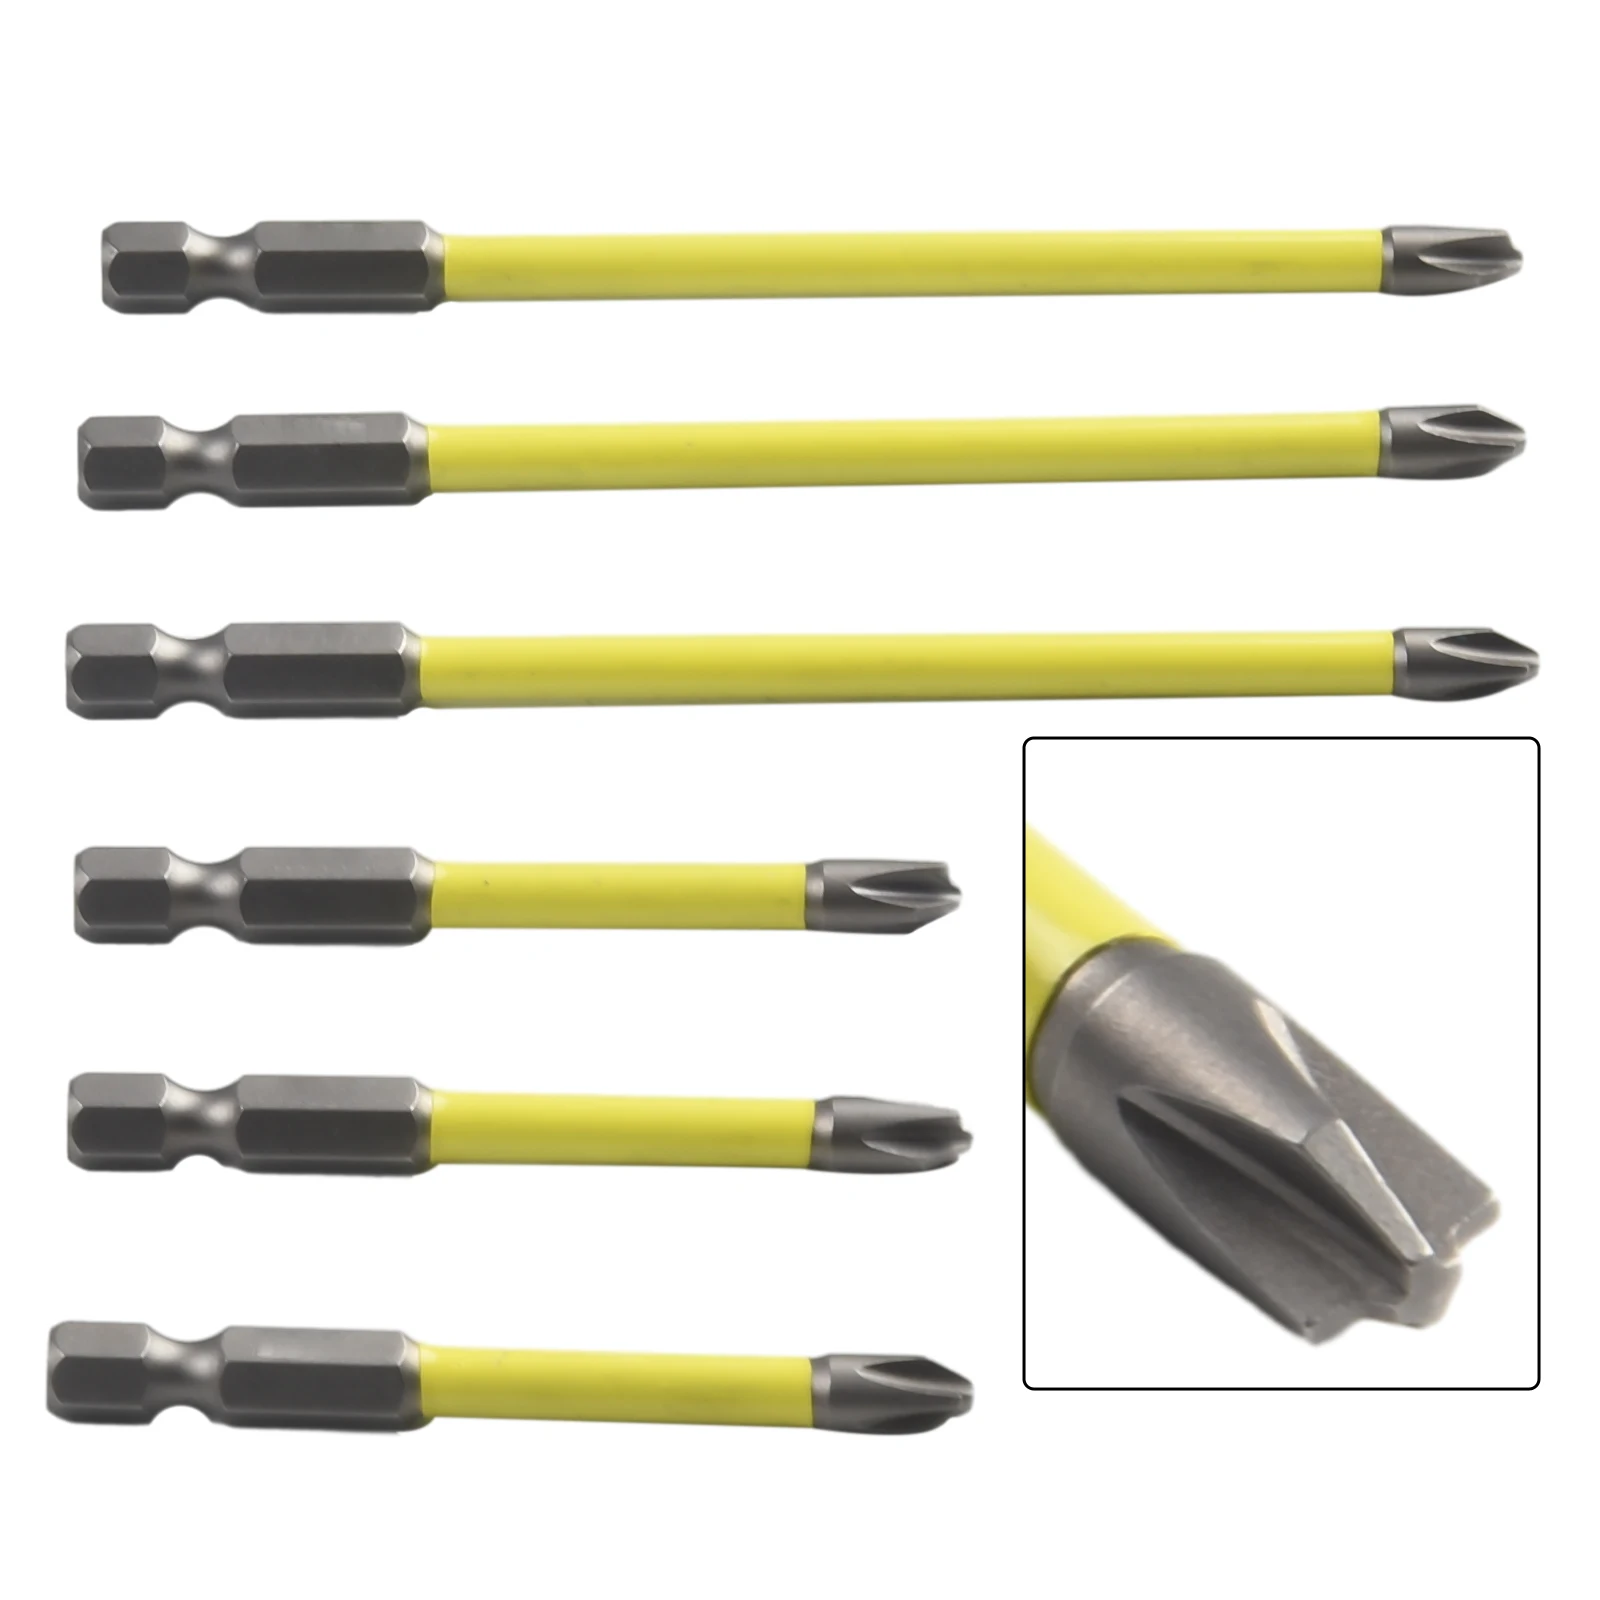 

6Pcs Screwdriver Bits 65mm 110mm Magnetic Special Slotted Cross FPH2 For Electrician Socket Switch Alloy Steel Rust Proof